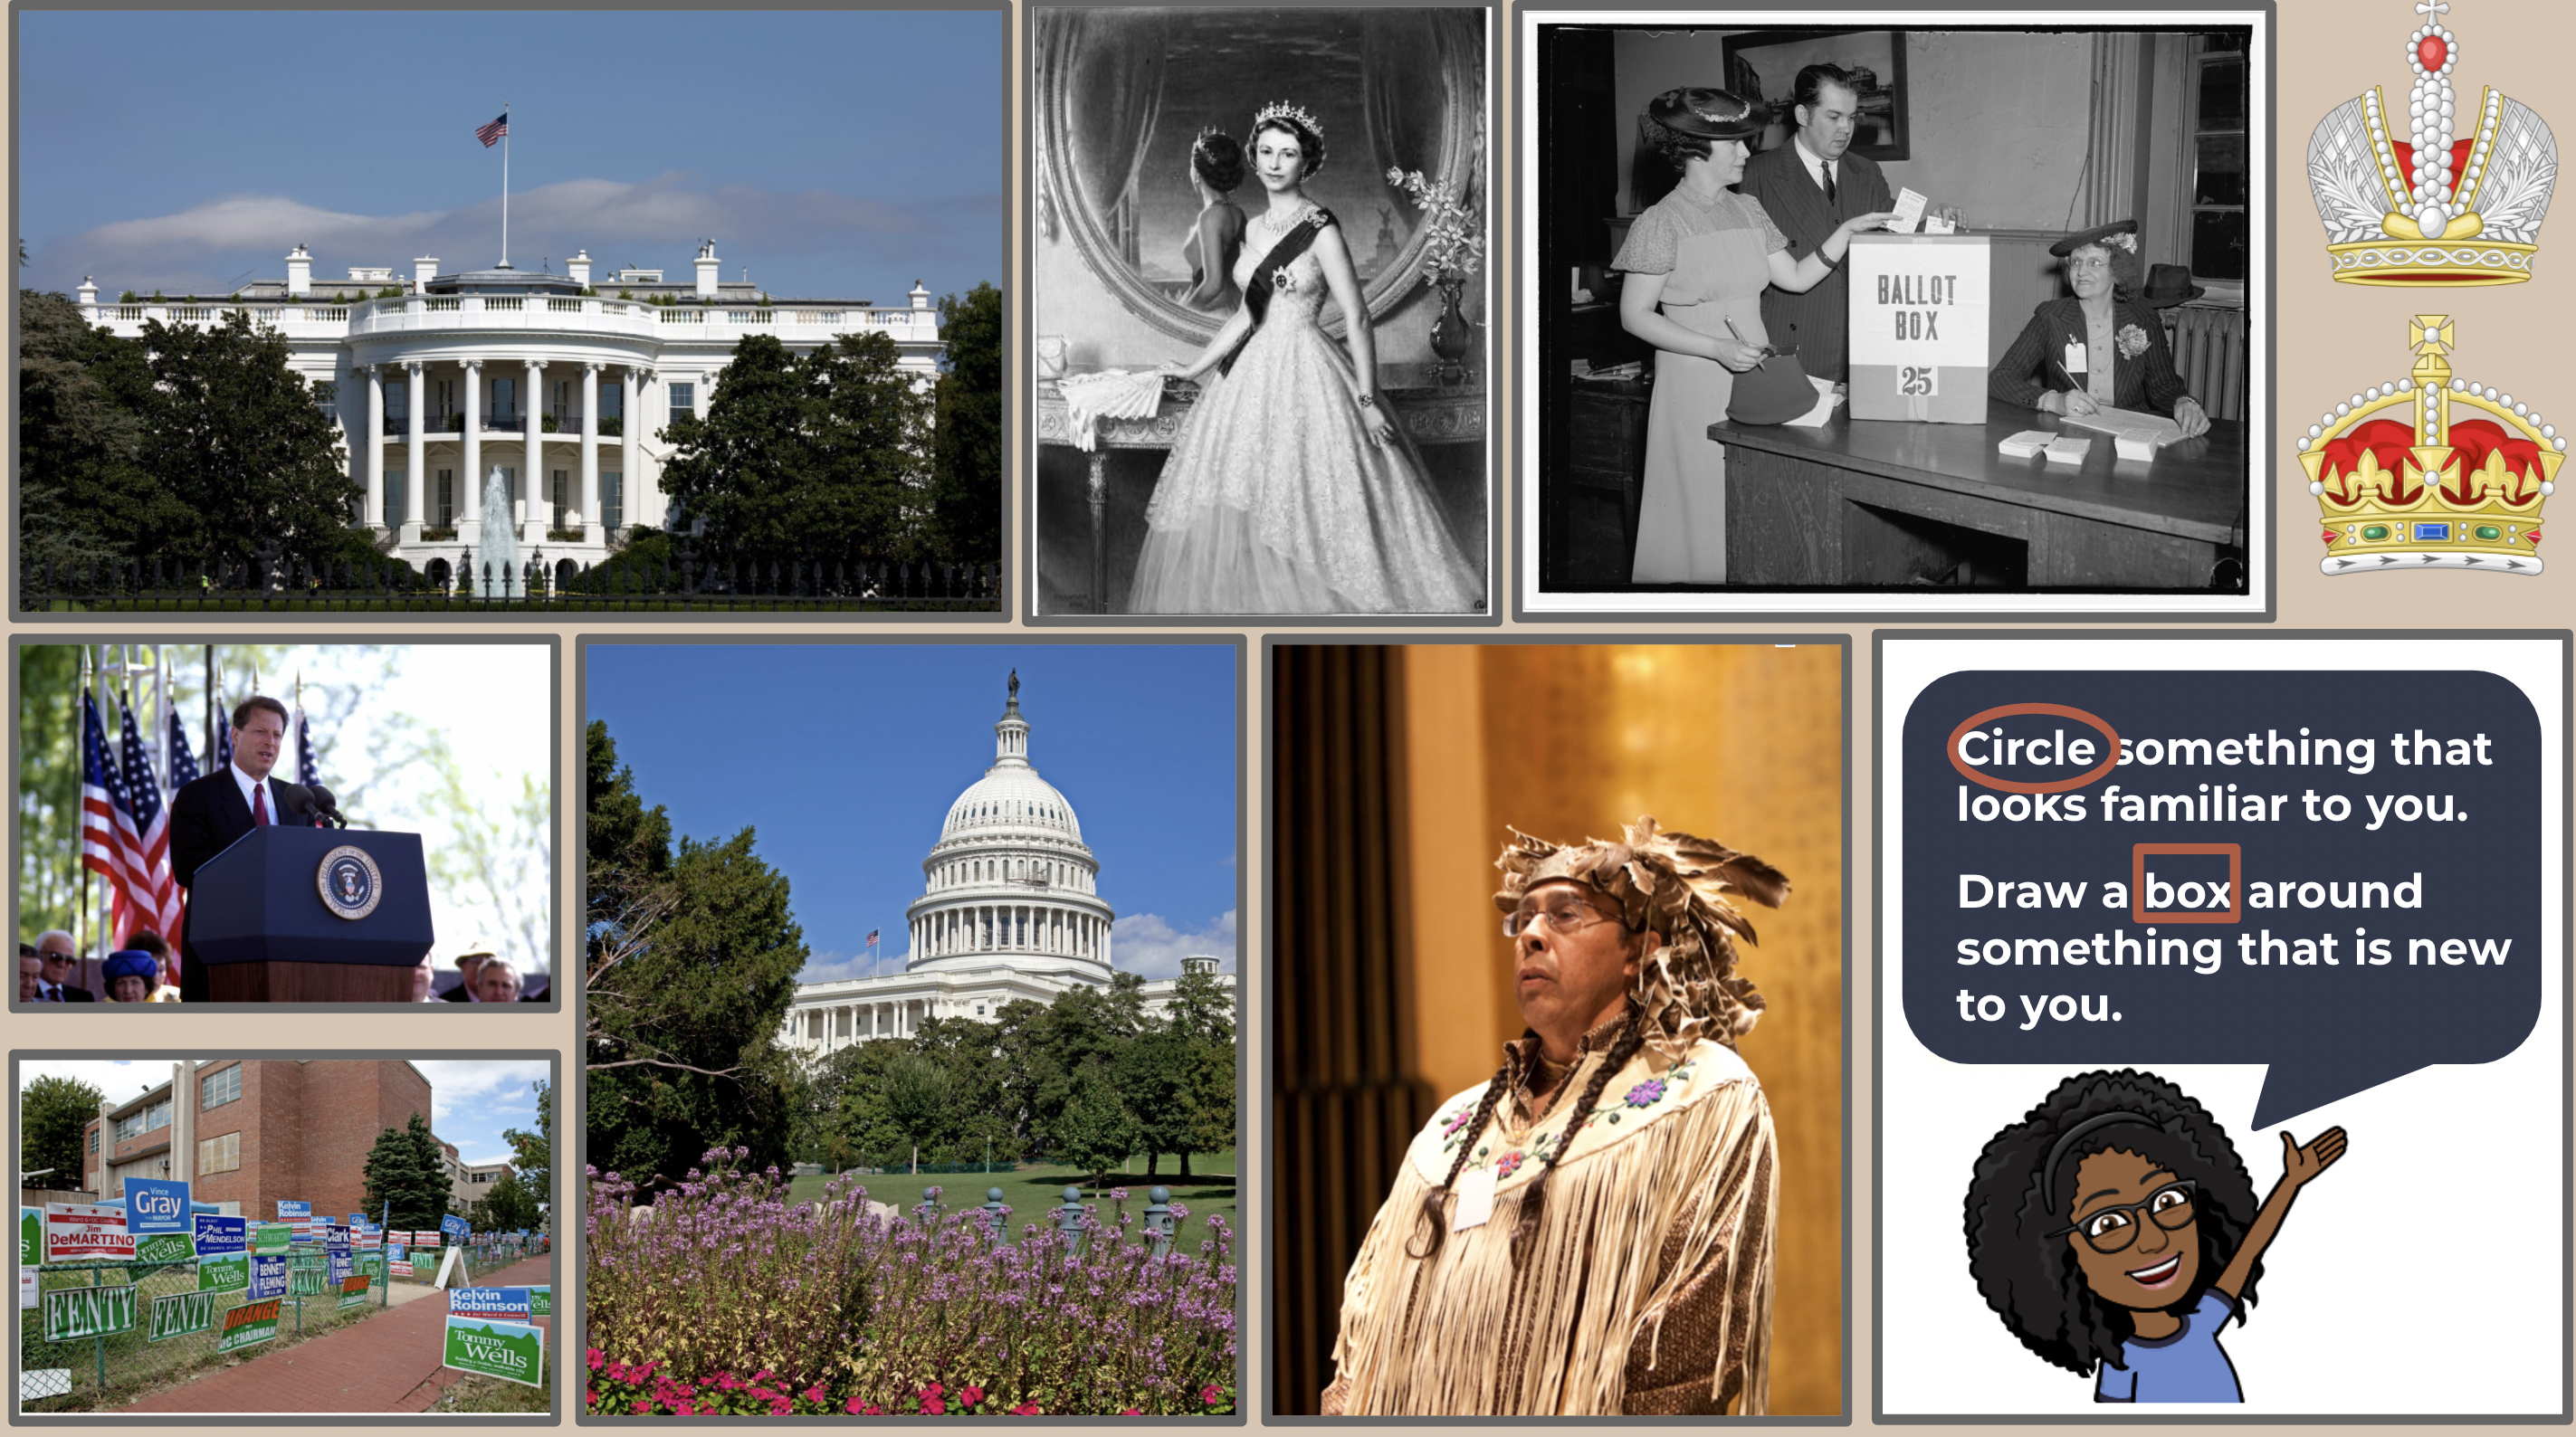 a collage of 6 photos with a cartoon character instructing "Circle something that looks familiar, draw a box around something that is new to you" images include a capitol dome, a painting of a young woman wearing a crown and sash with medals, a speaker behind a podium with a US emblem, a man with a feathered headdress.